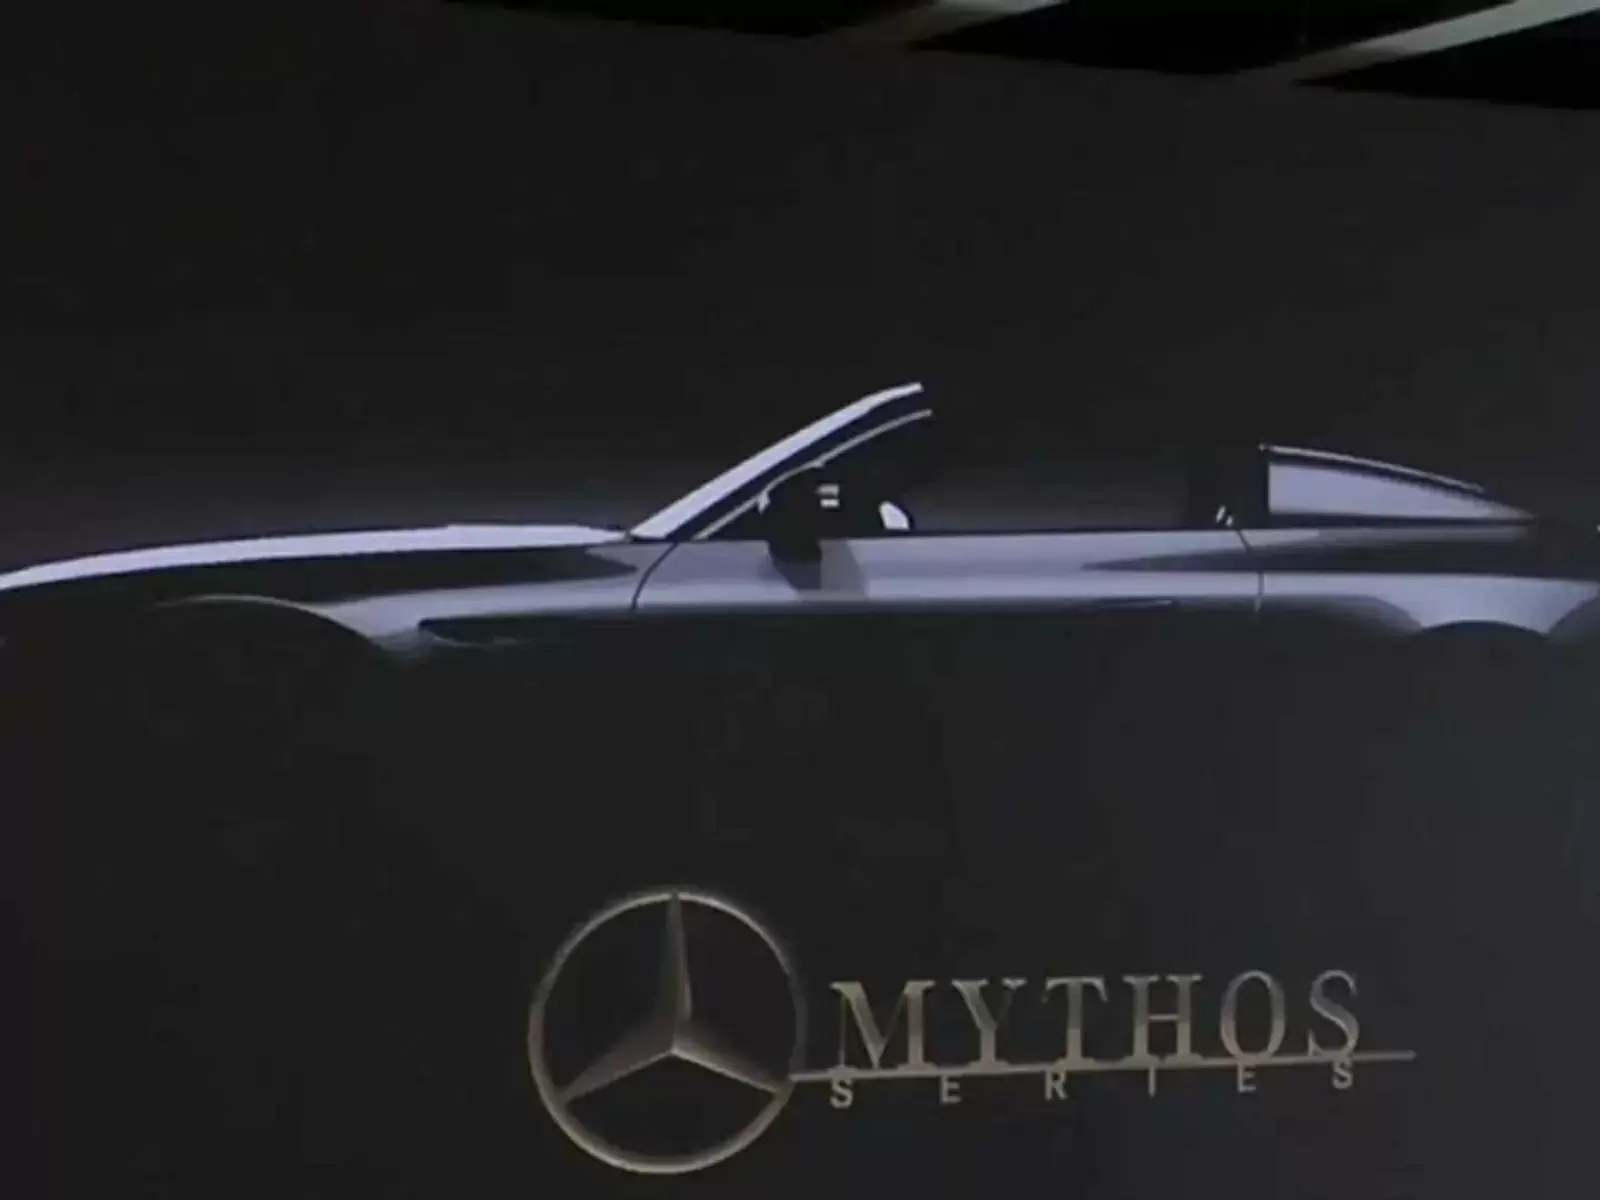 Mercedes Benz's first ultra-luxury Mythos model will be launched in 2025, will be entered under the name SL Speedster